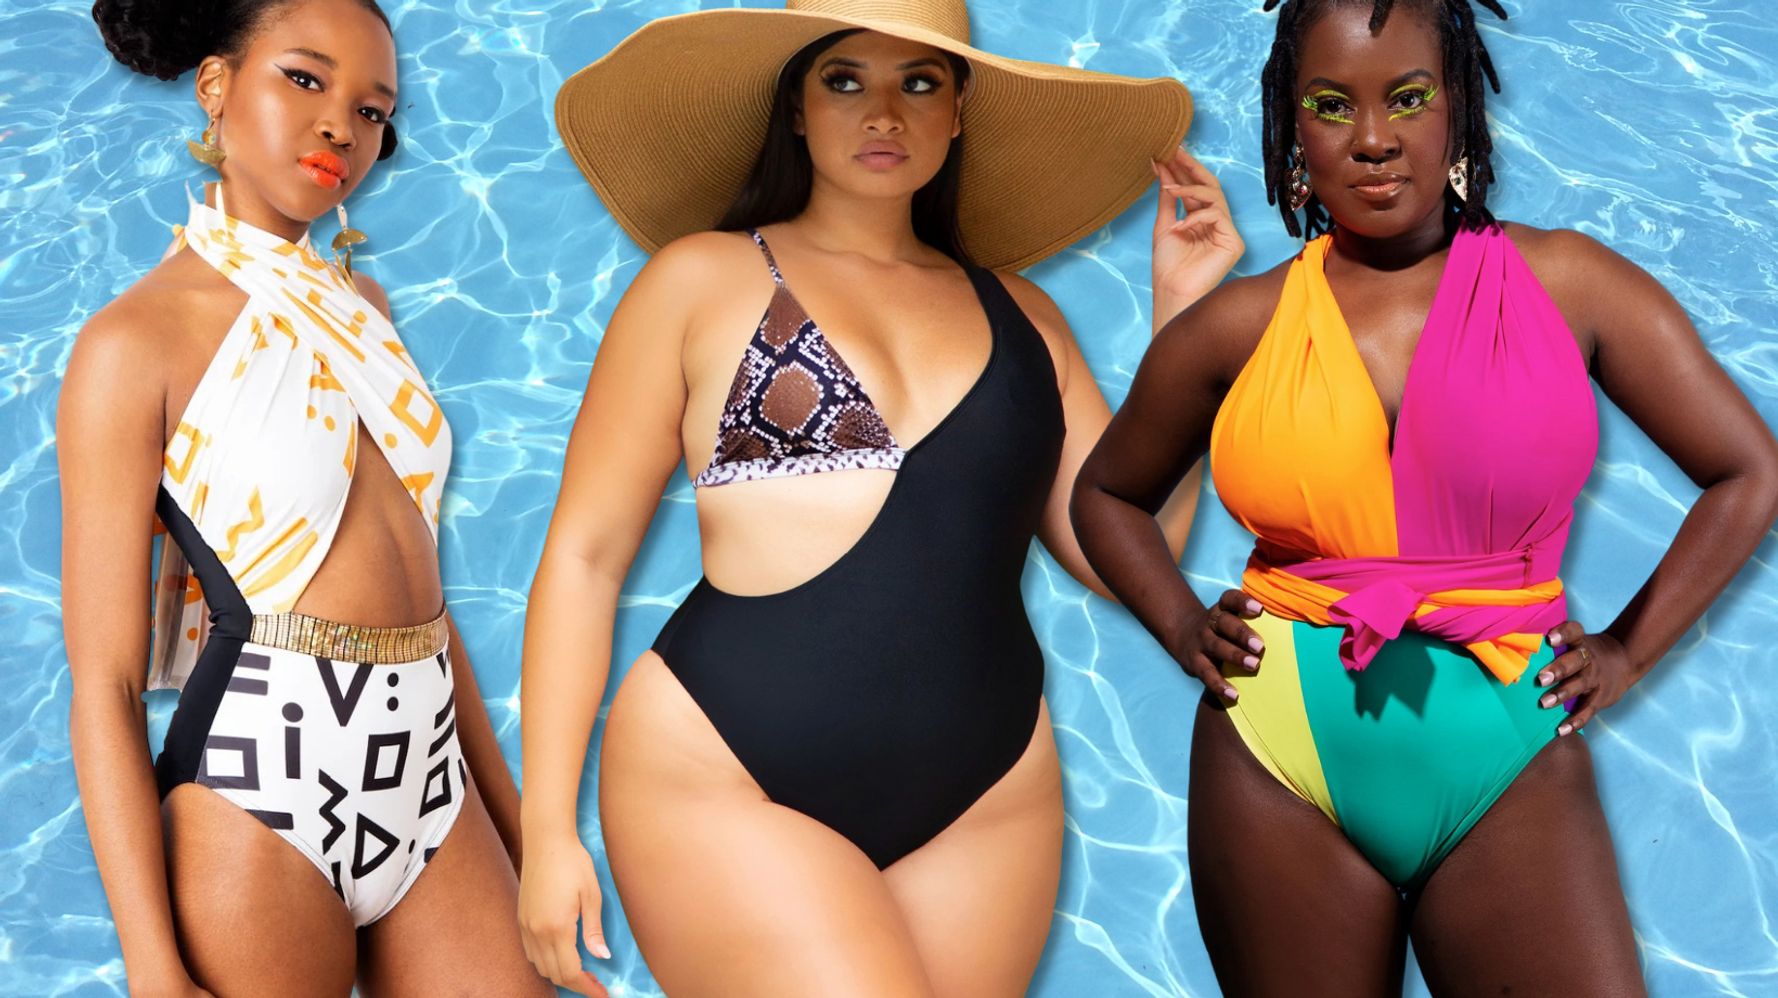 50 swimsuit patterns to get you to the beach this summer - Adopt